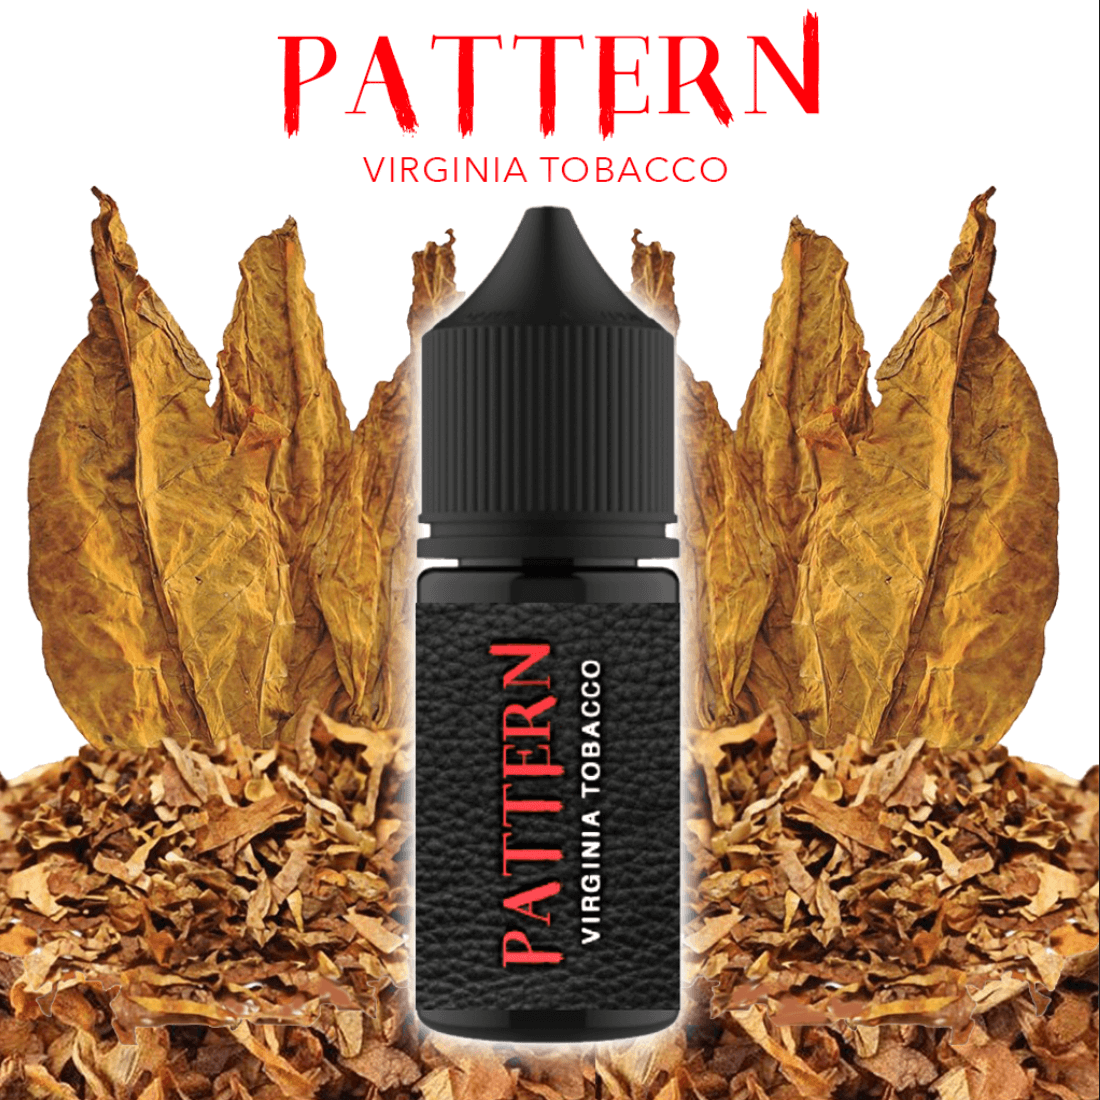 Virginia Tobacco By PATTERN